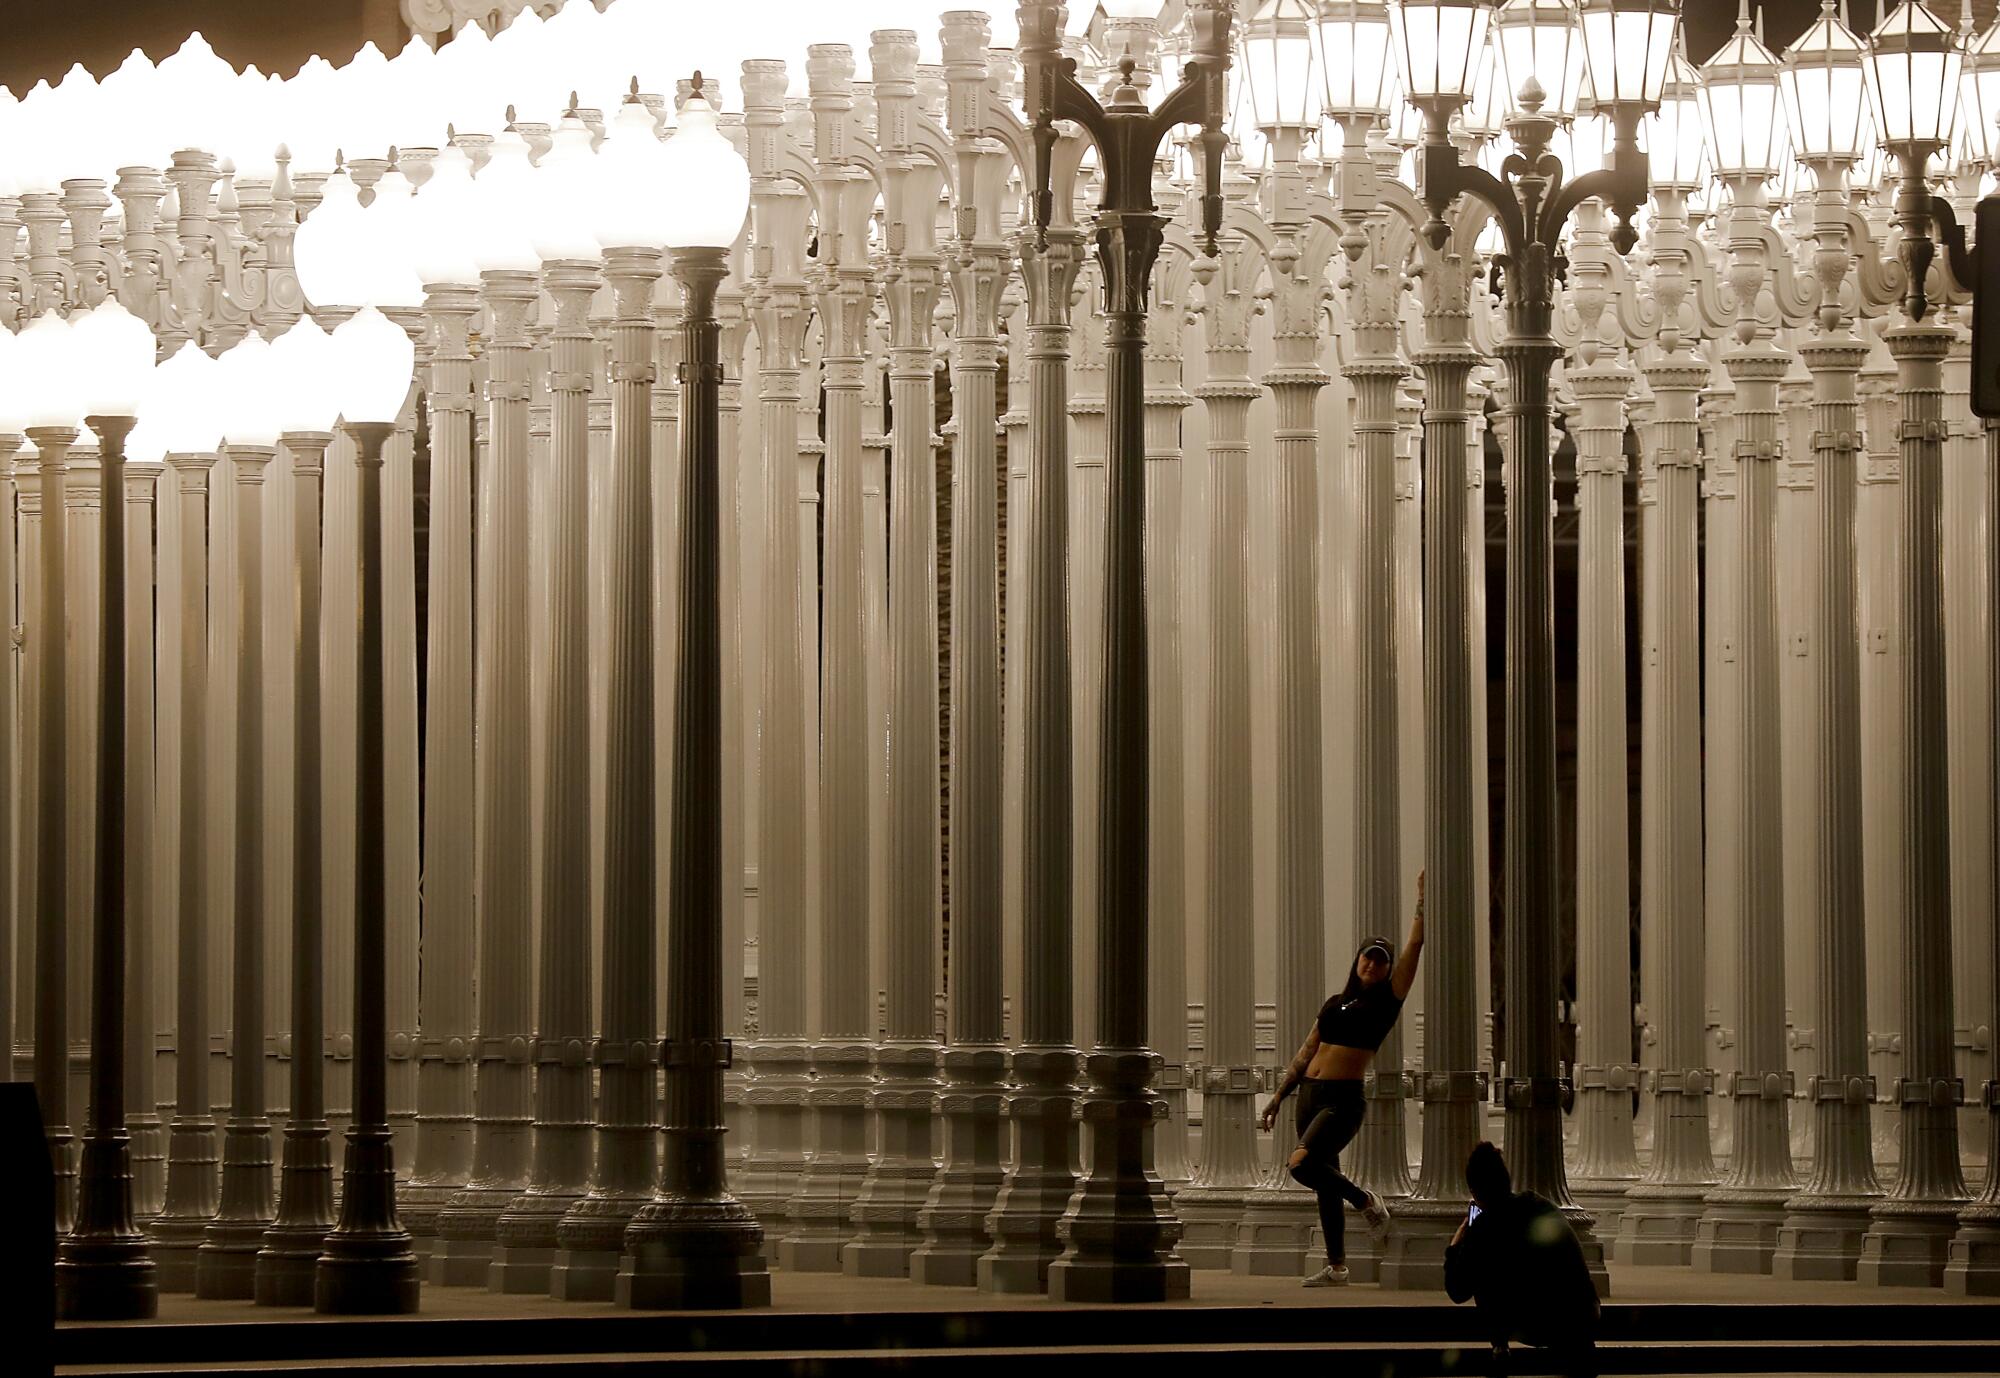 Urban Light sculpture at the Los Angeles County of Museum of Art